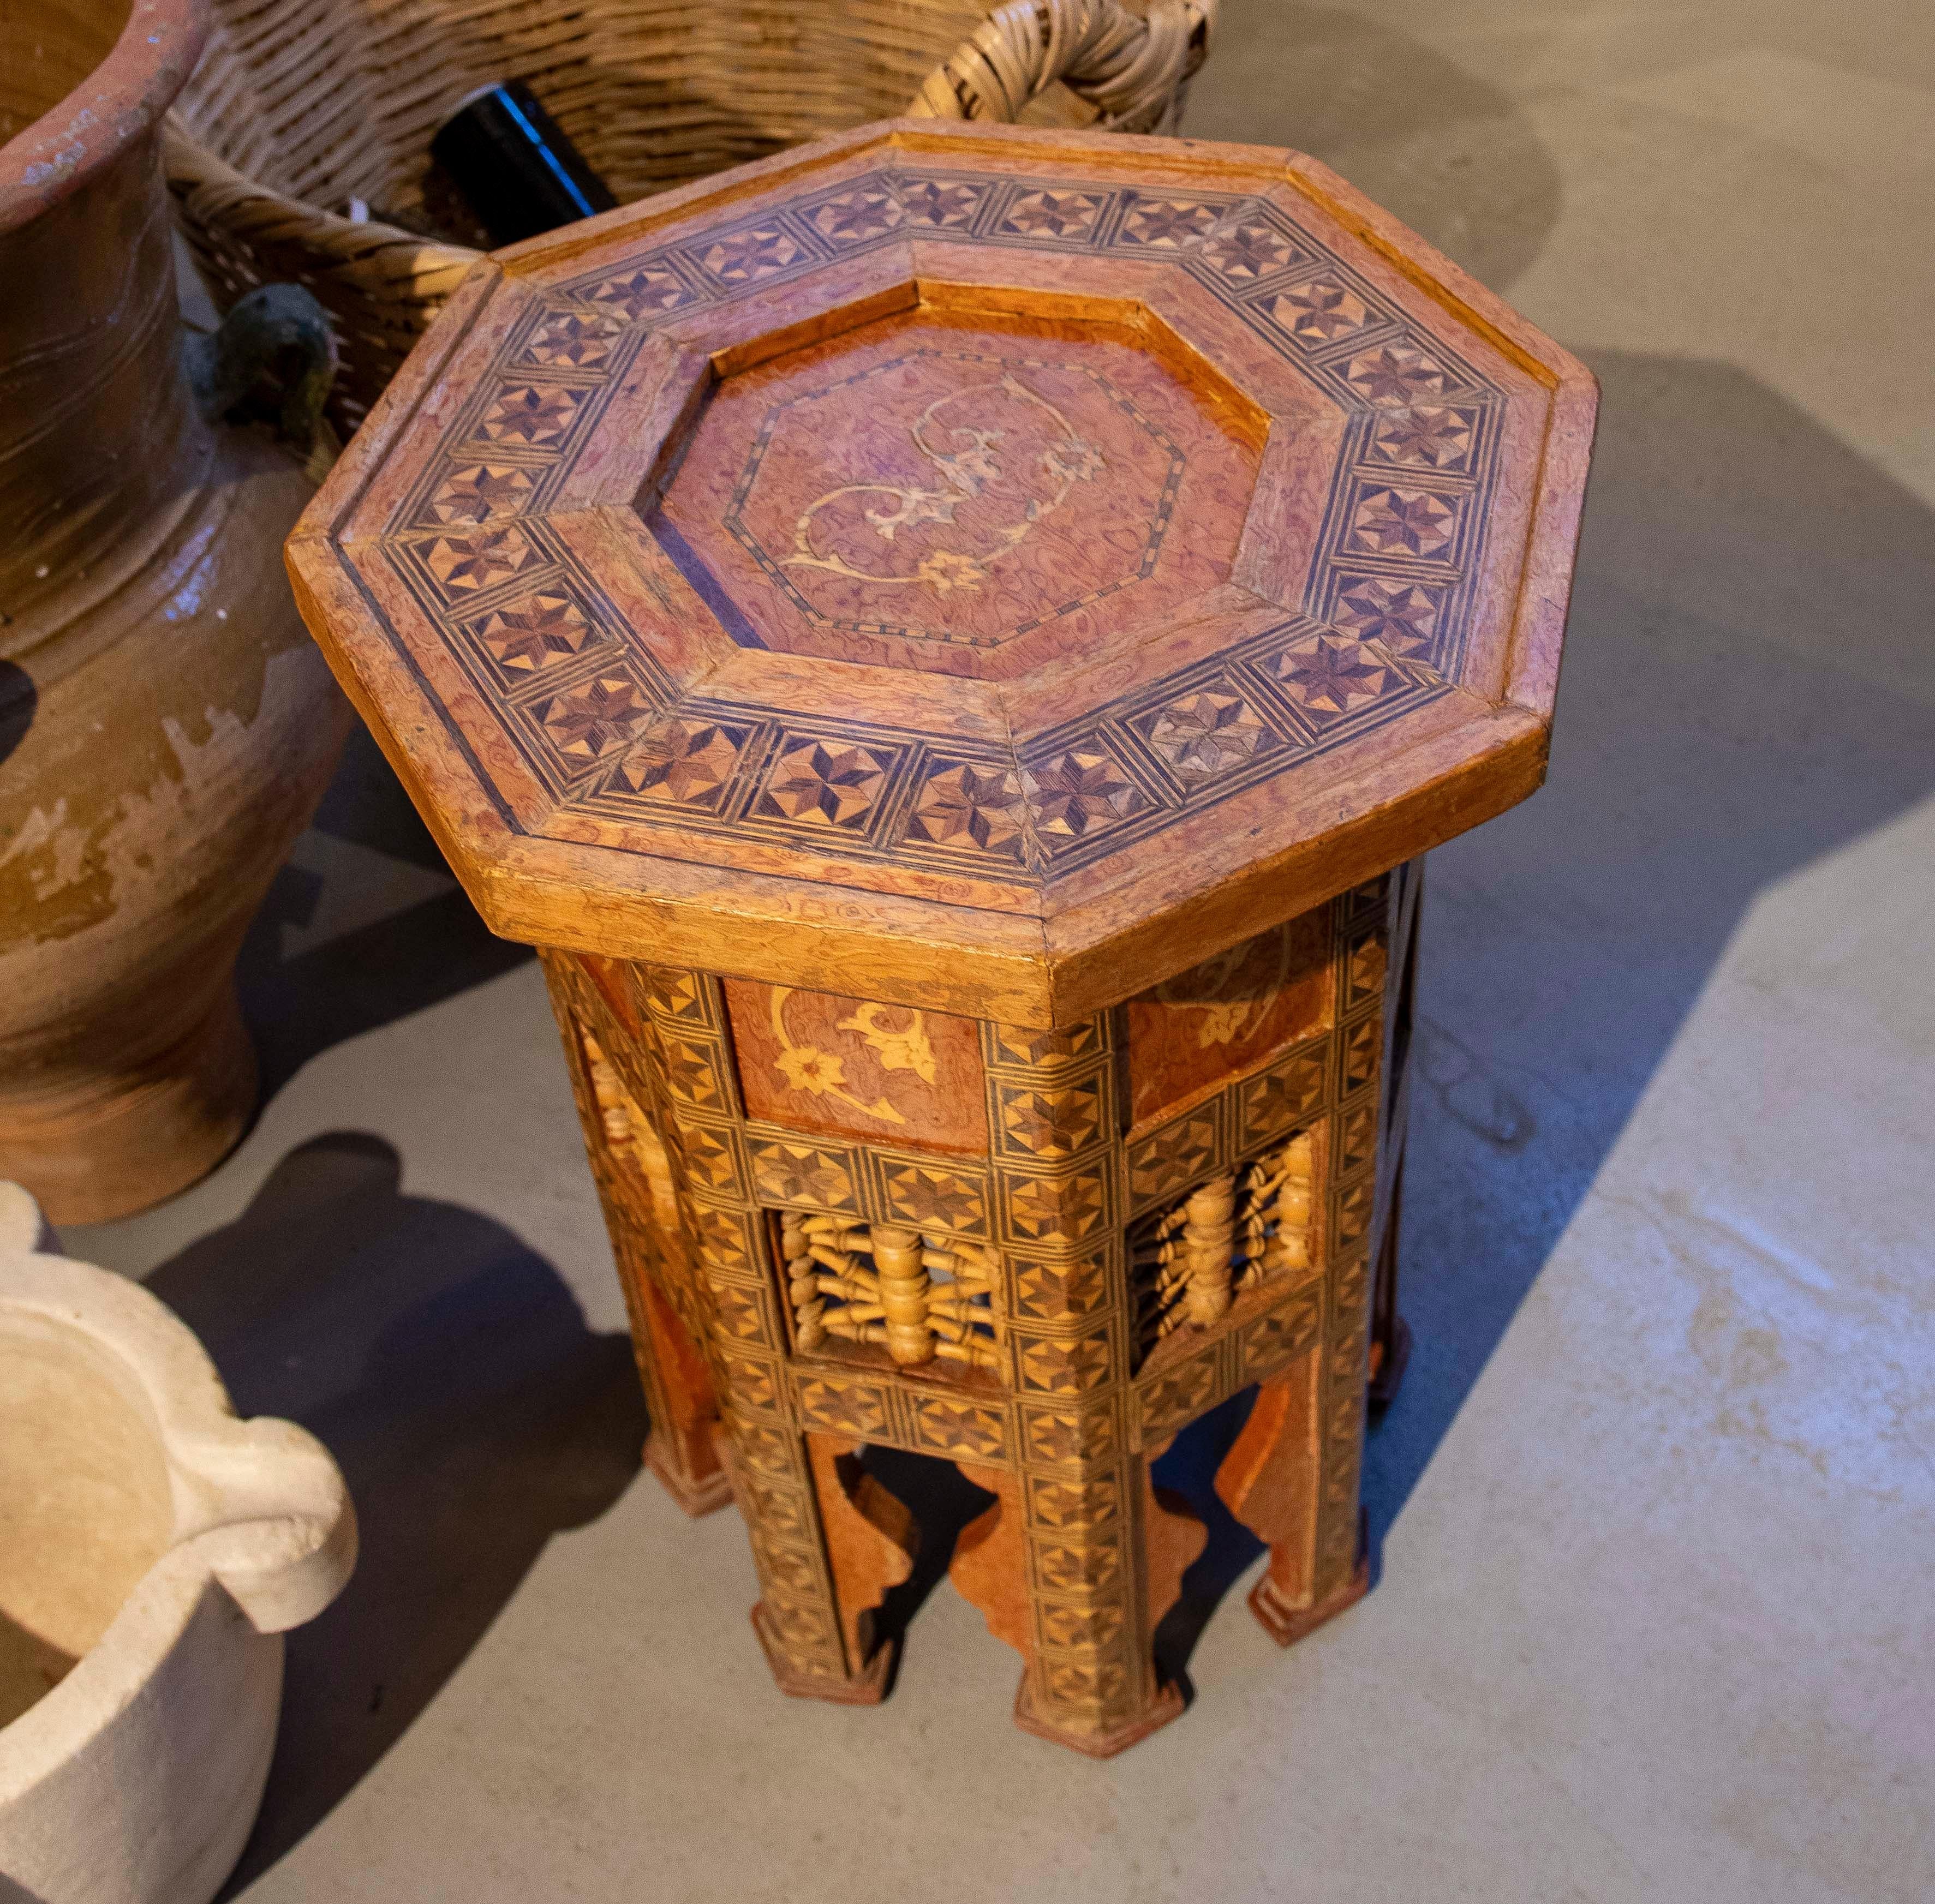 Turkish  1980s Octagonal Wooden Table with Inlays